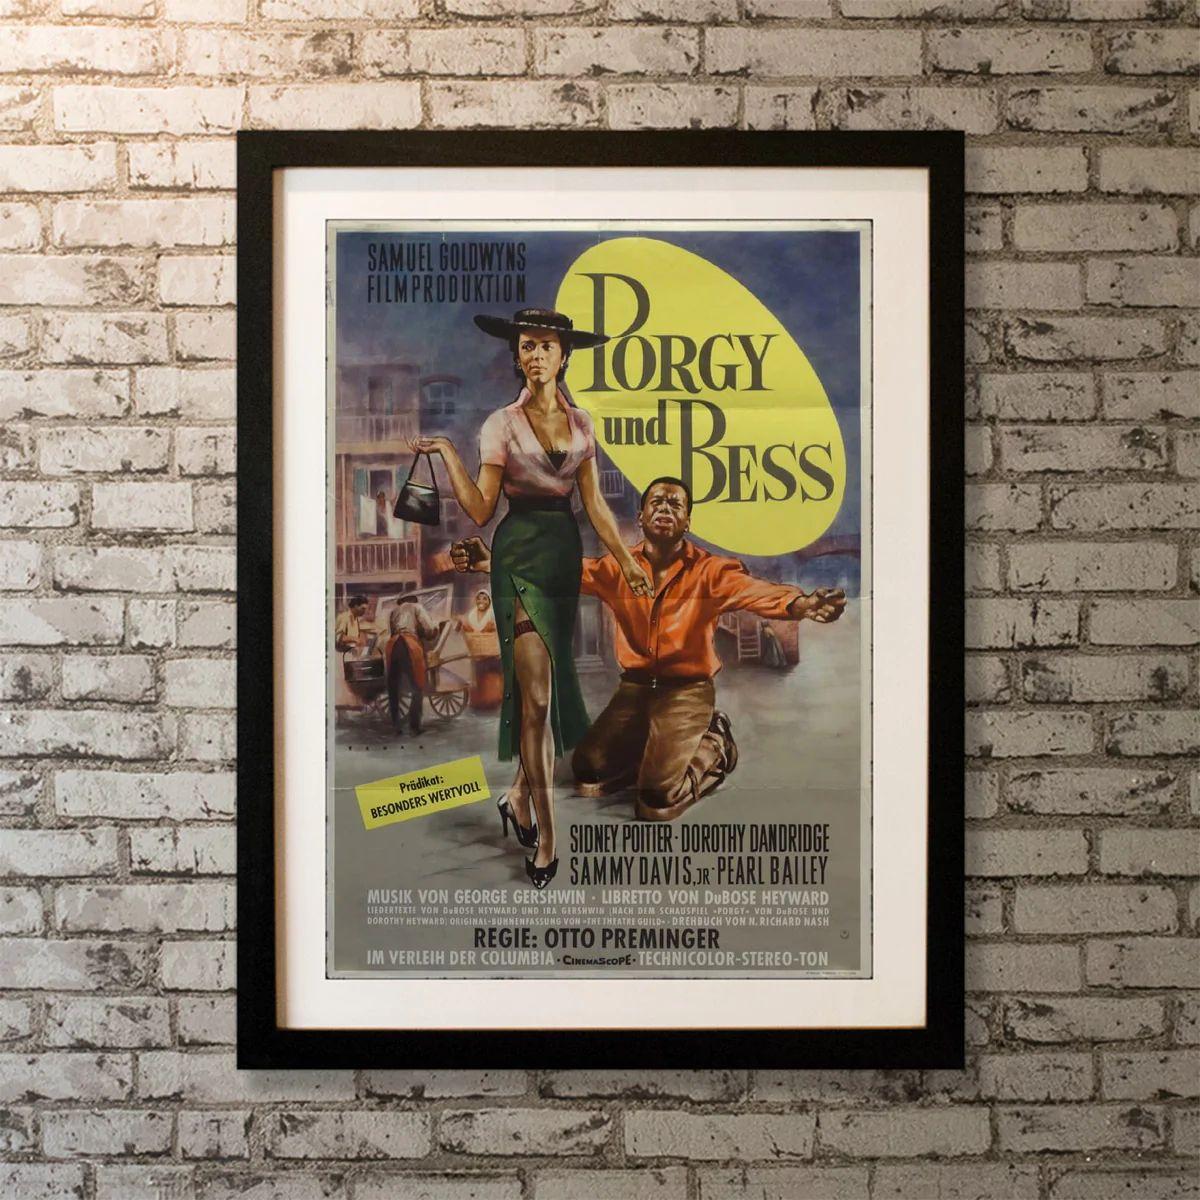 Porgy and Bess, Unframed Poster, 1959

Original German Plakat (23 X 33 Inches). A woman whose past is scorned by nearly everyone around her meets a man who'd love her regardlessly- if only everyone else would allow them to.

Year: